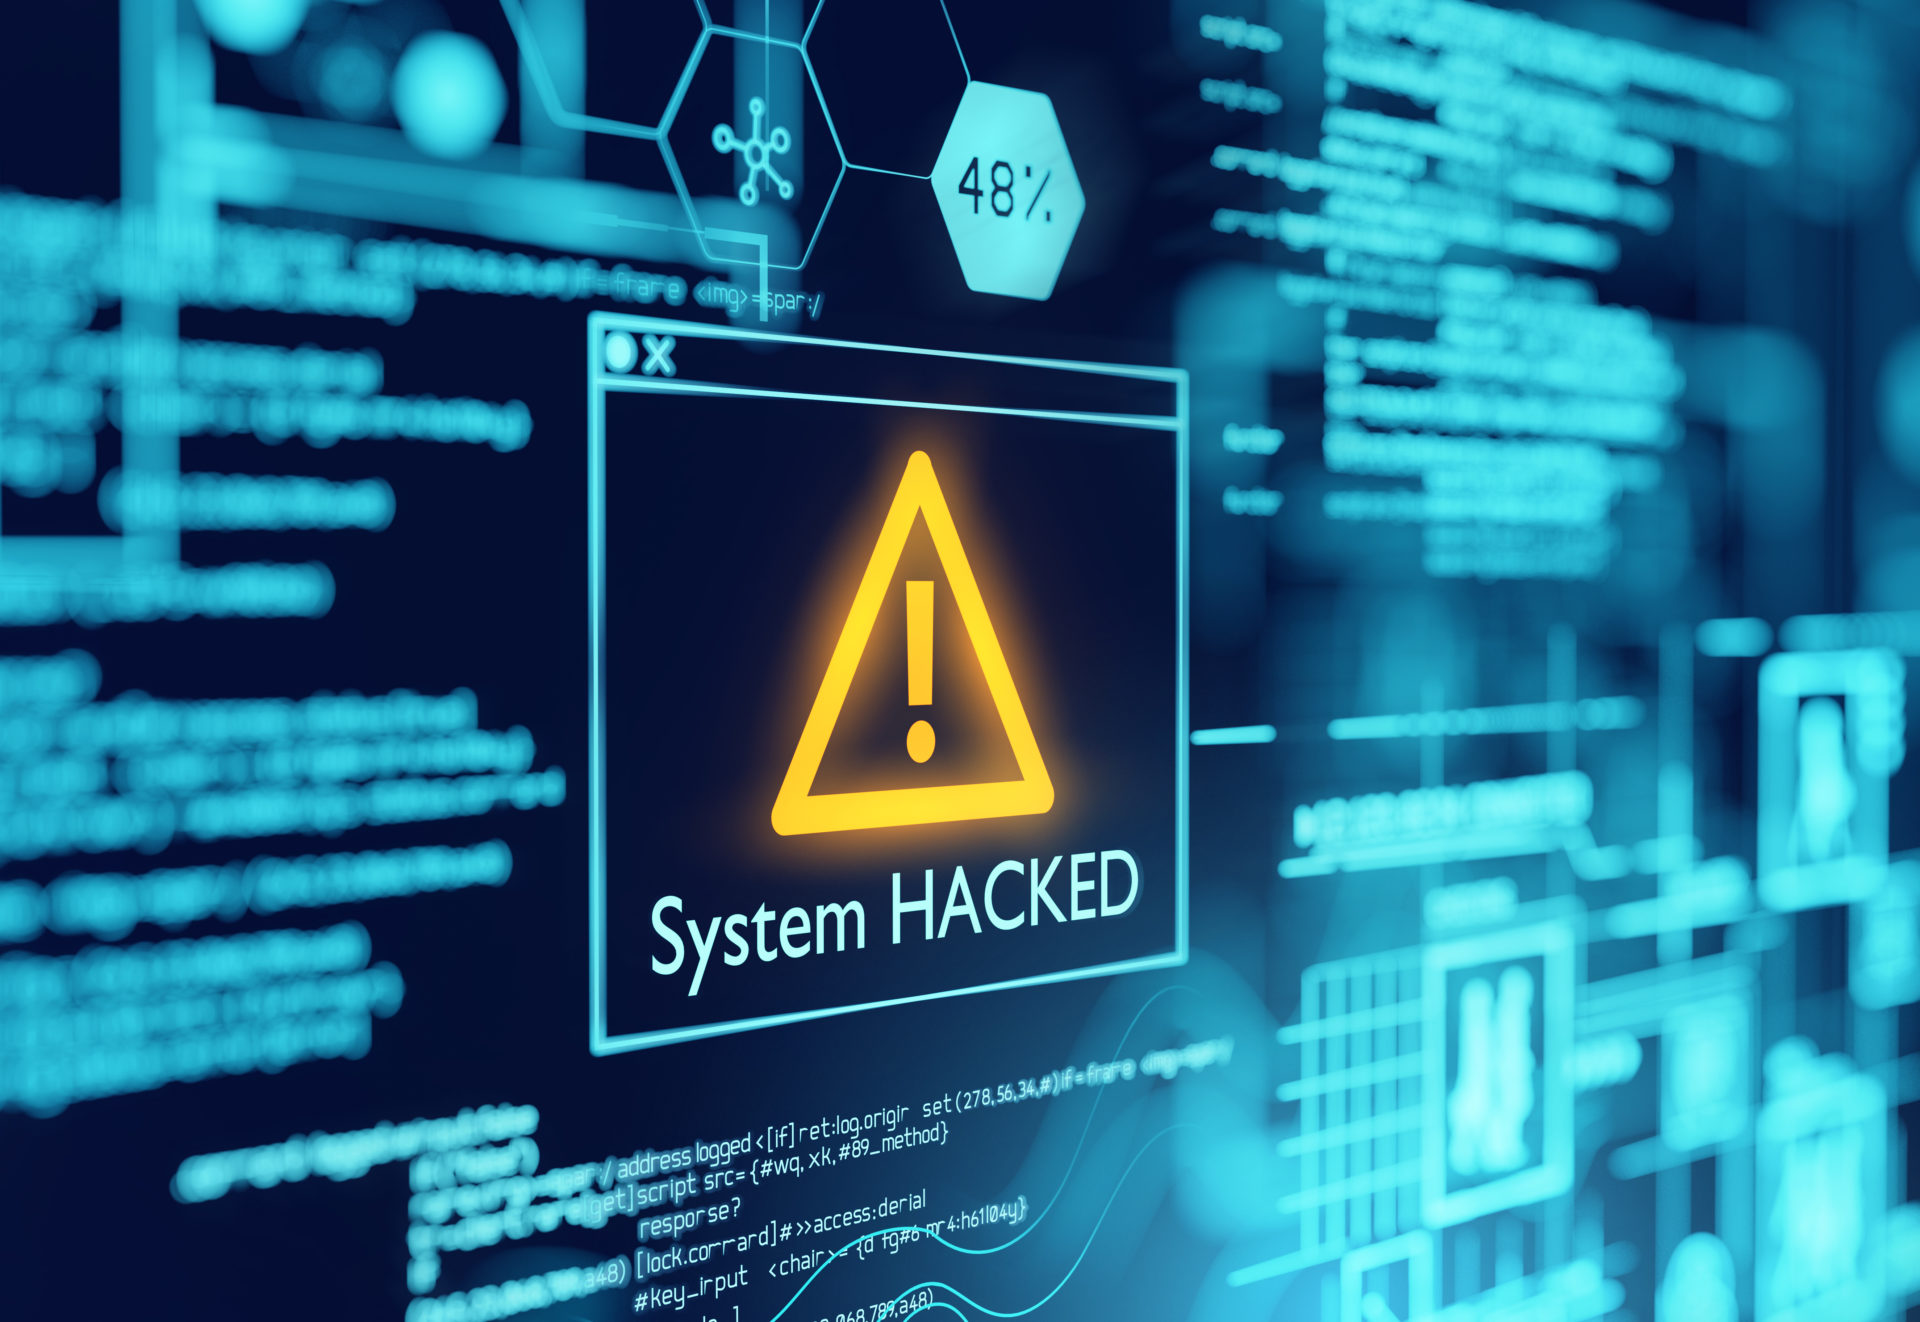 No Internet of Things without strong cyber security